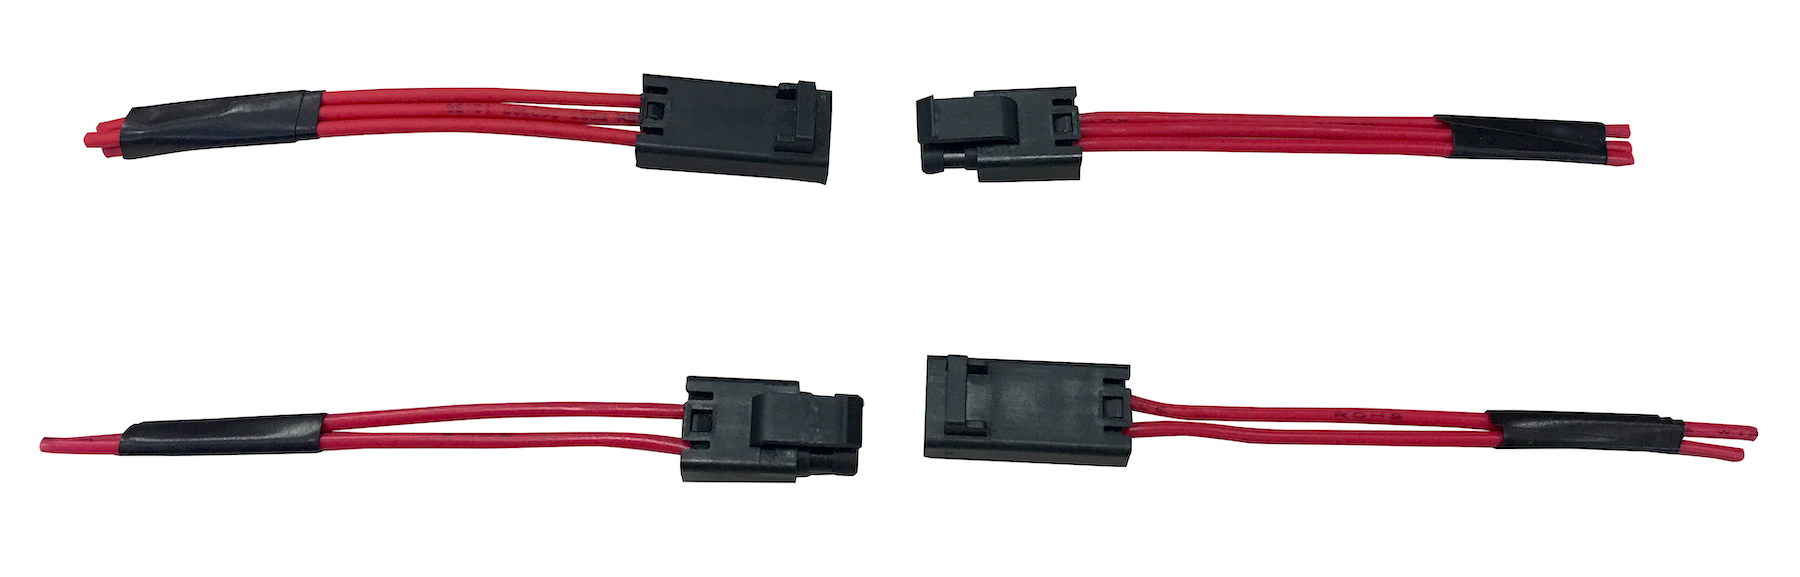 high-reliability connector products from Amphenol ICC